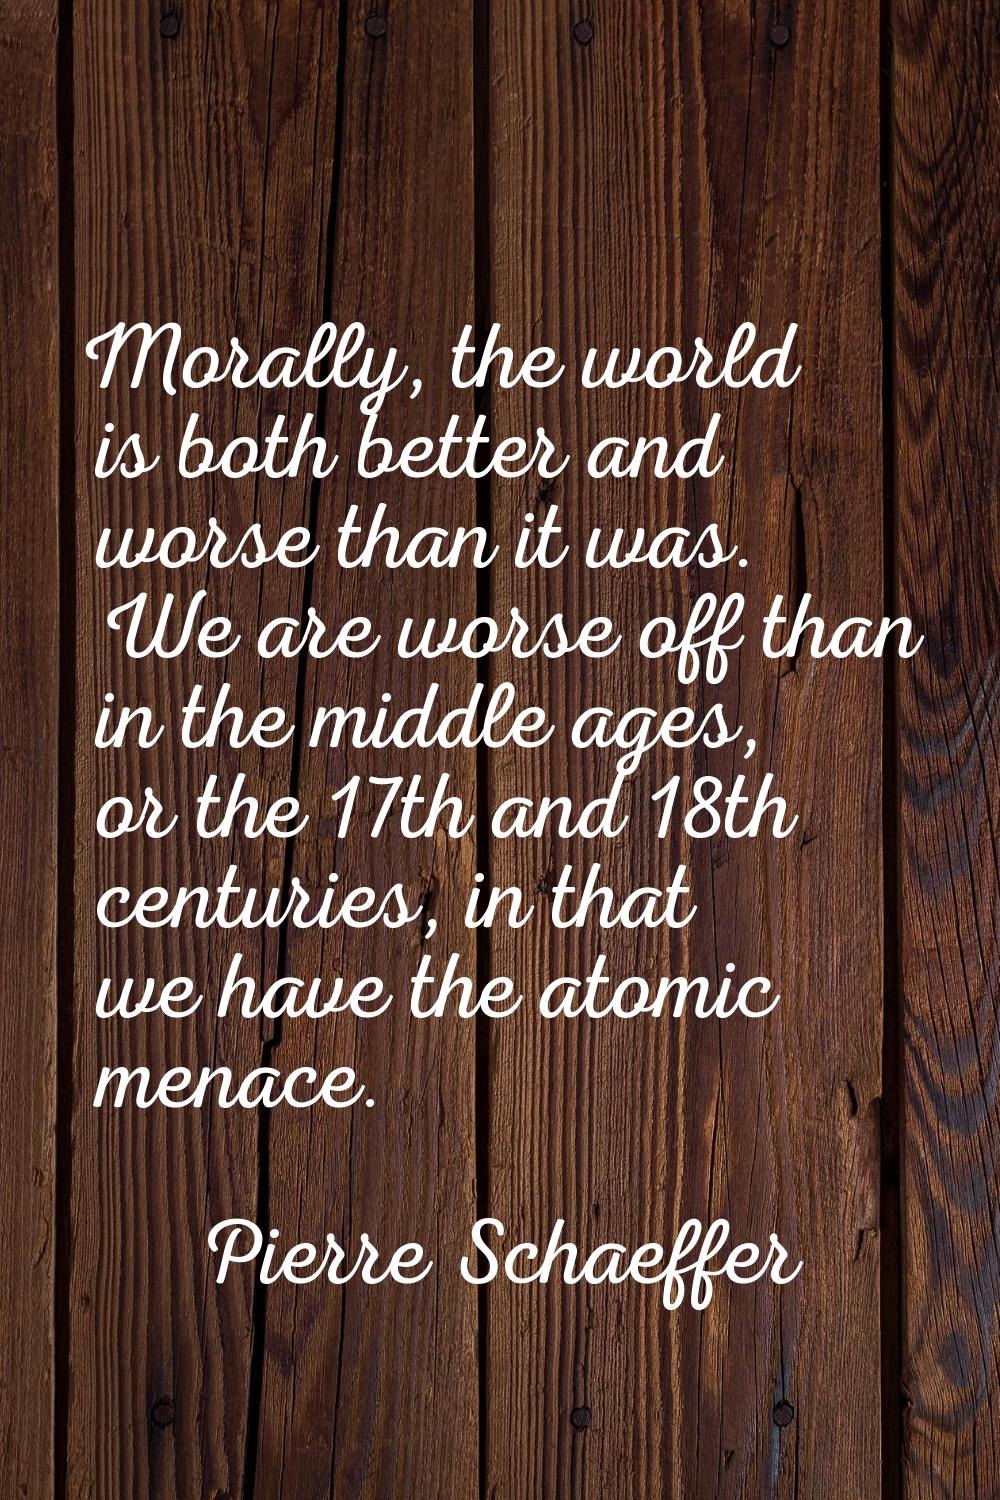 Morally, the world is both better and worse than it was. We are worse off than in the middle ages, 